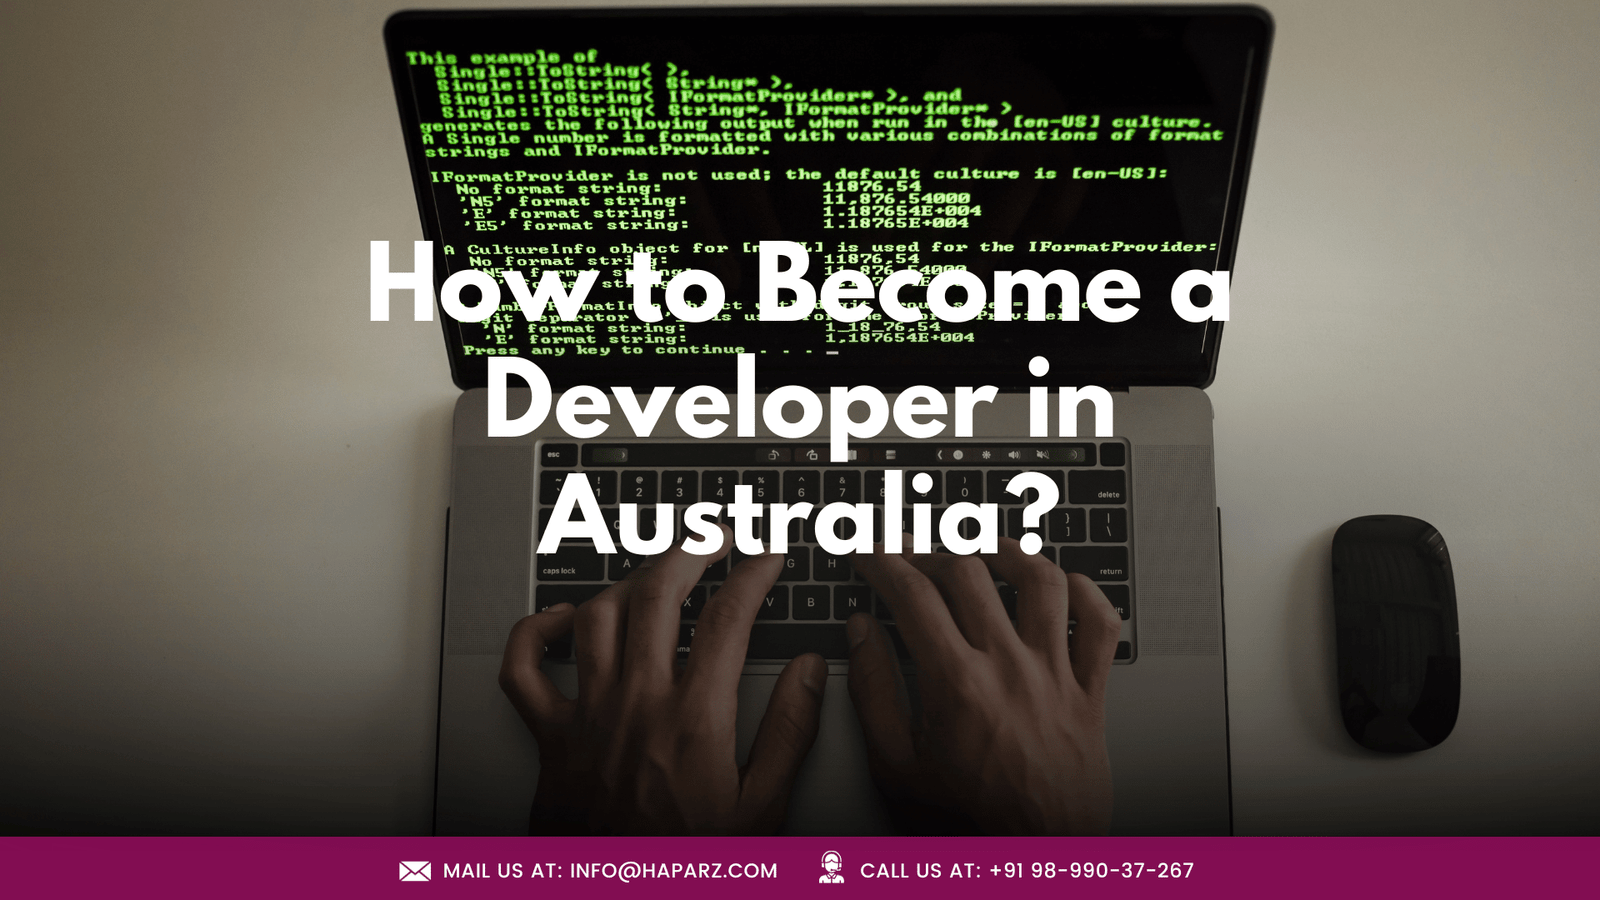 How to Become a Developer in Australia?